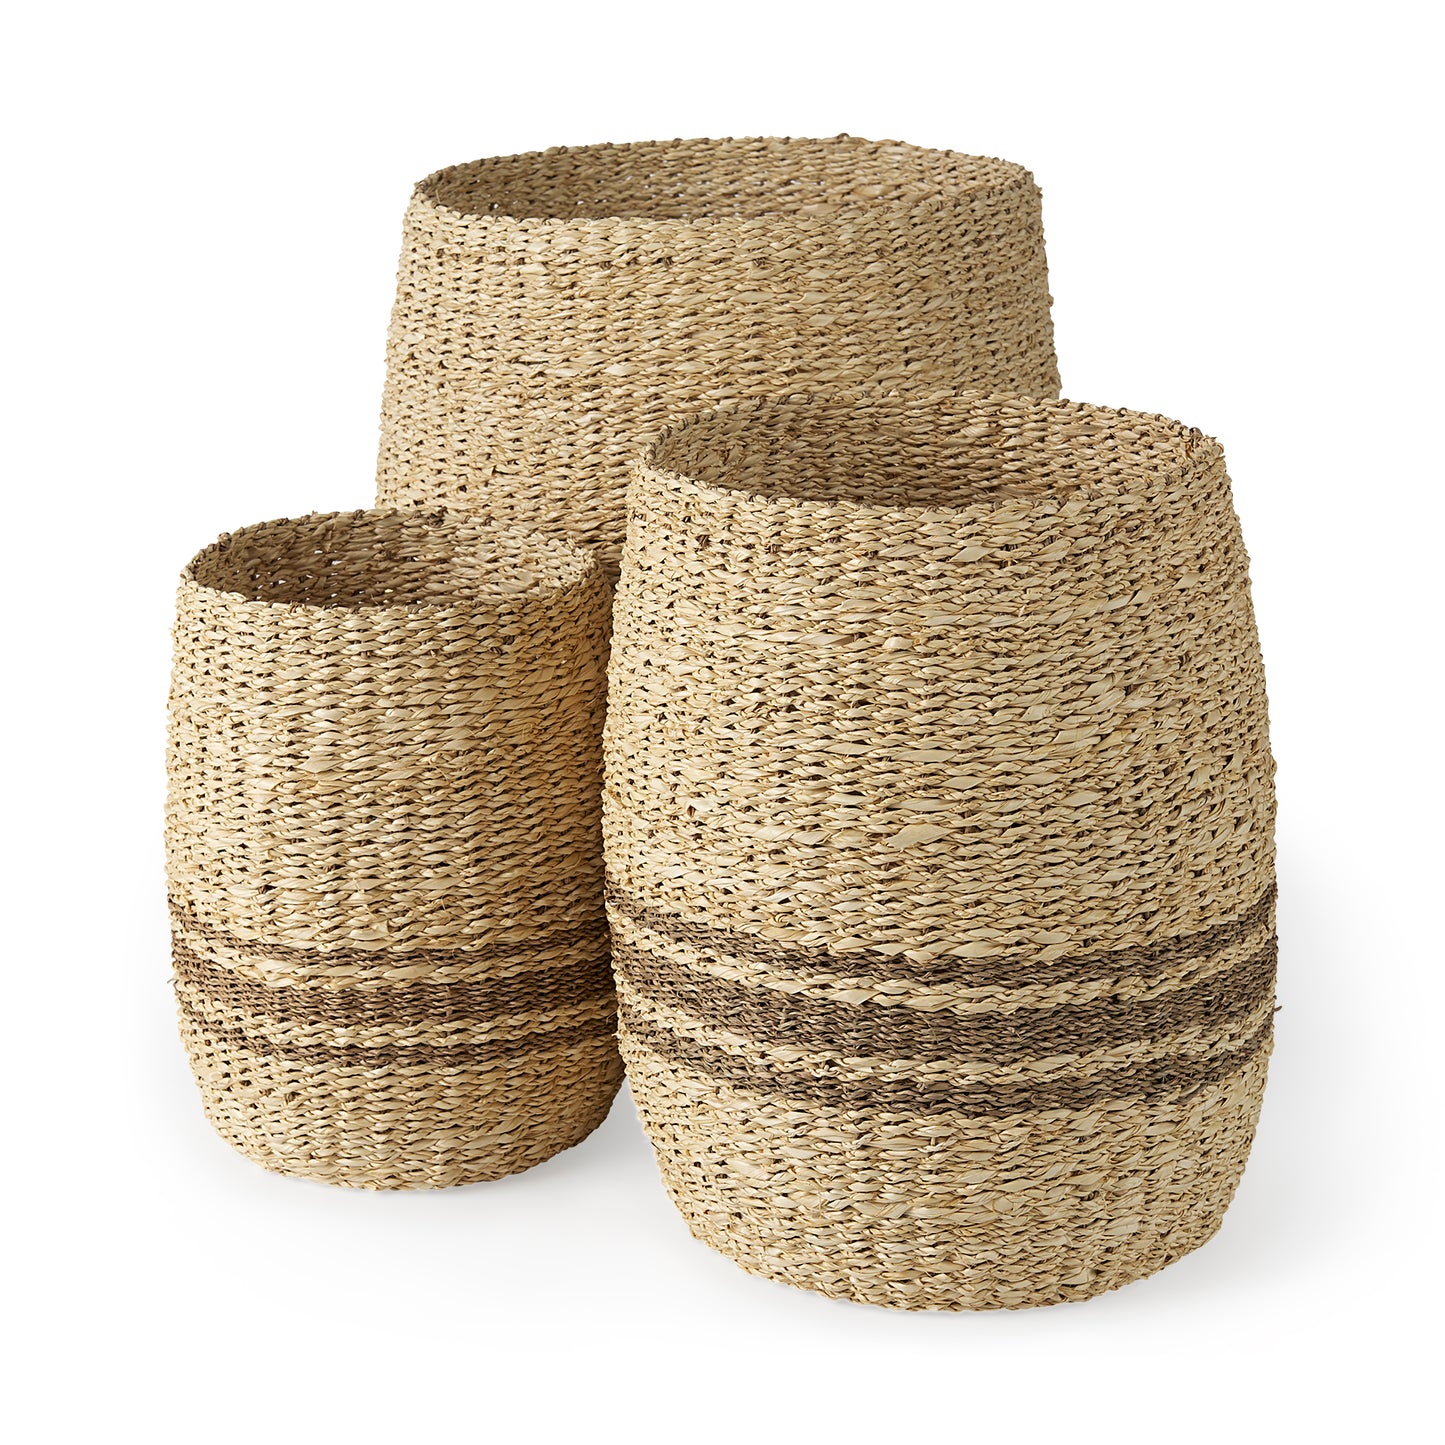 Sivannah Light Brown and Medium Brown Striped Seagrass Round Basket - Small